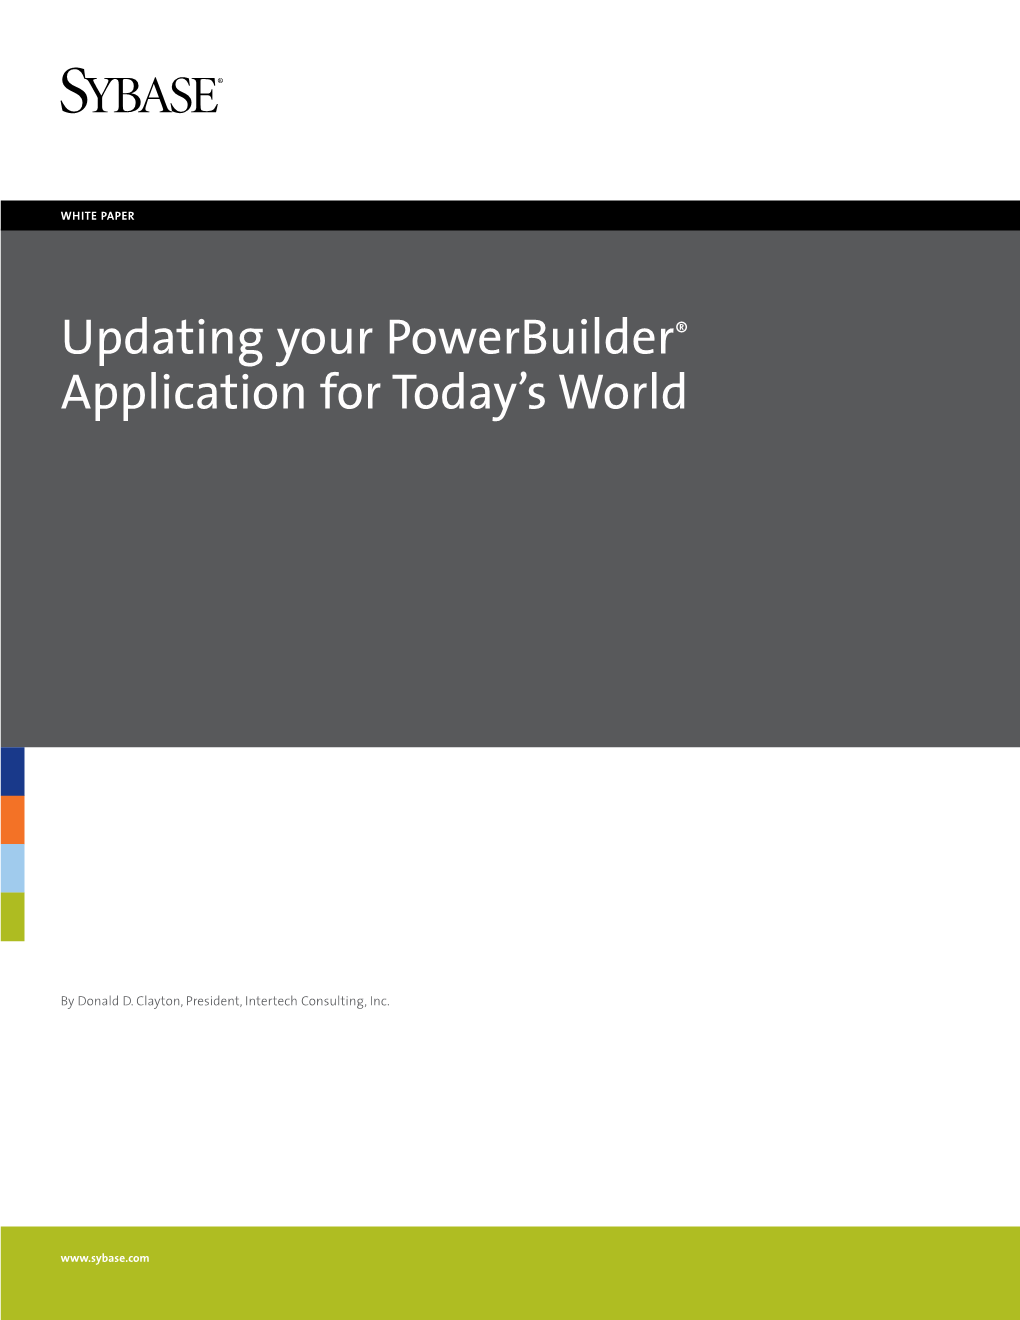 Updating Your Powerbuilder Applications for Today's World